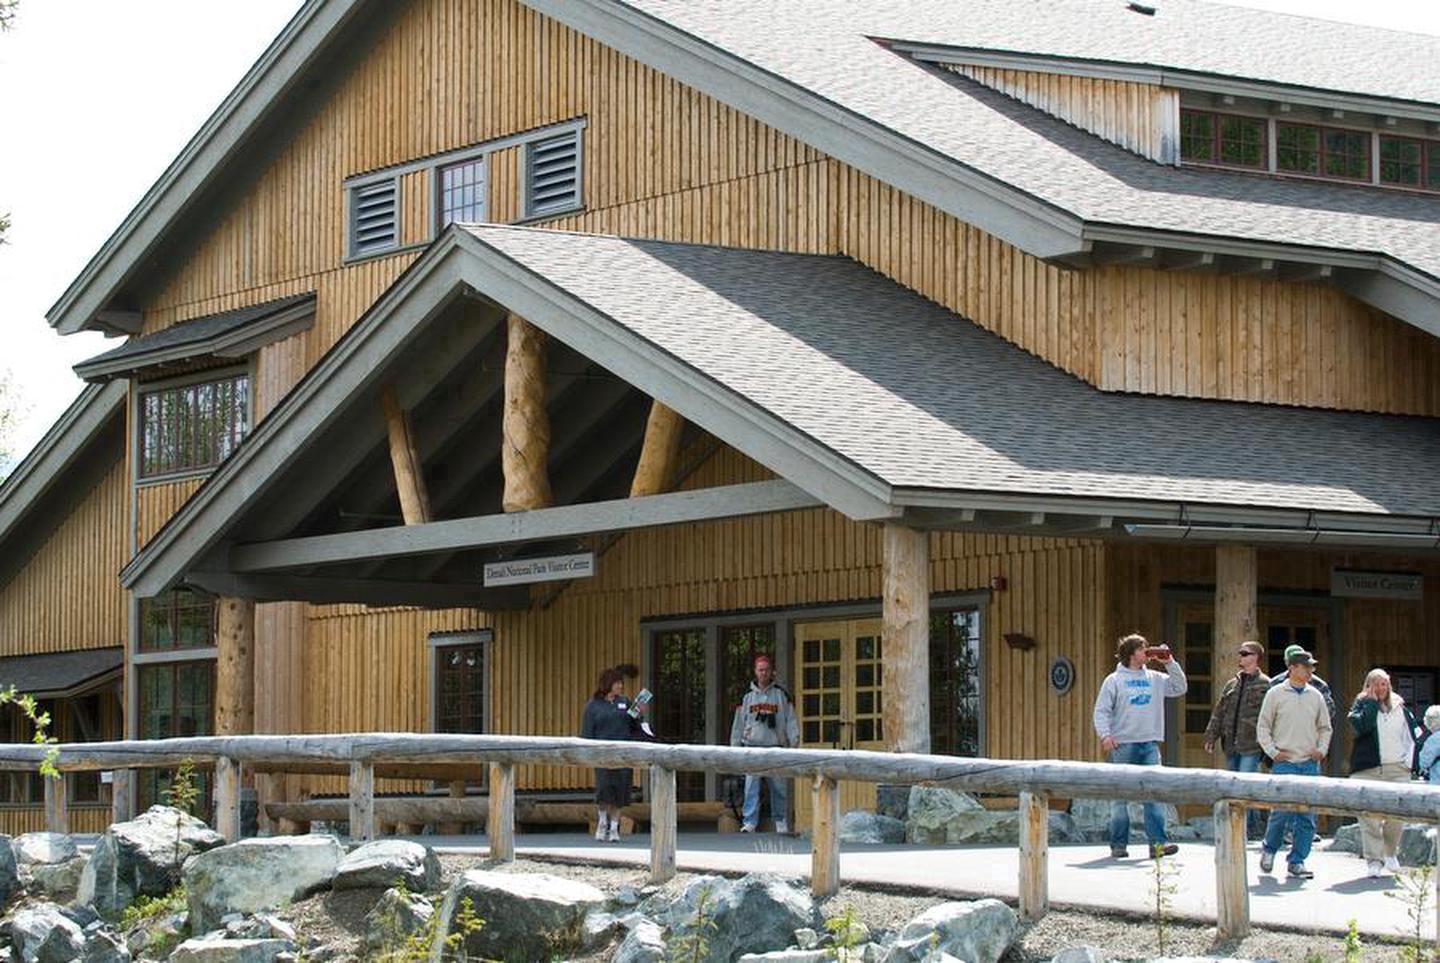 Preview photo of Denali Visitor Center